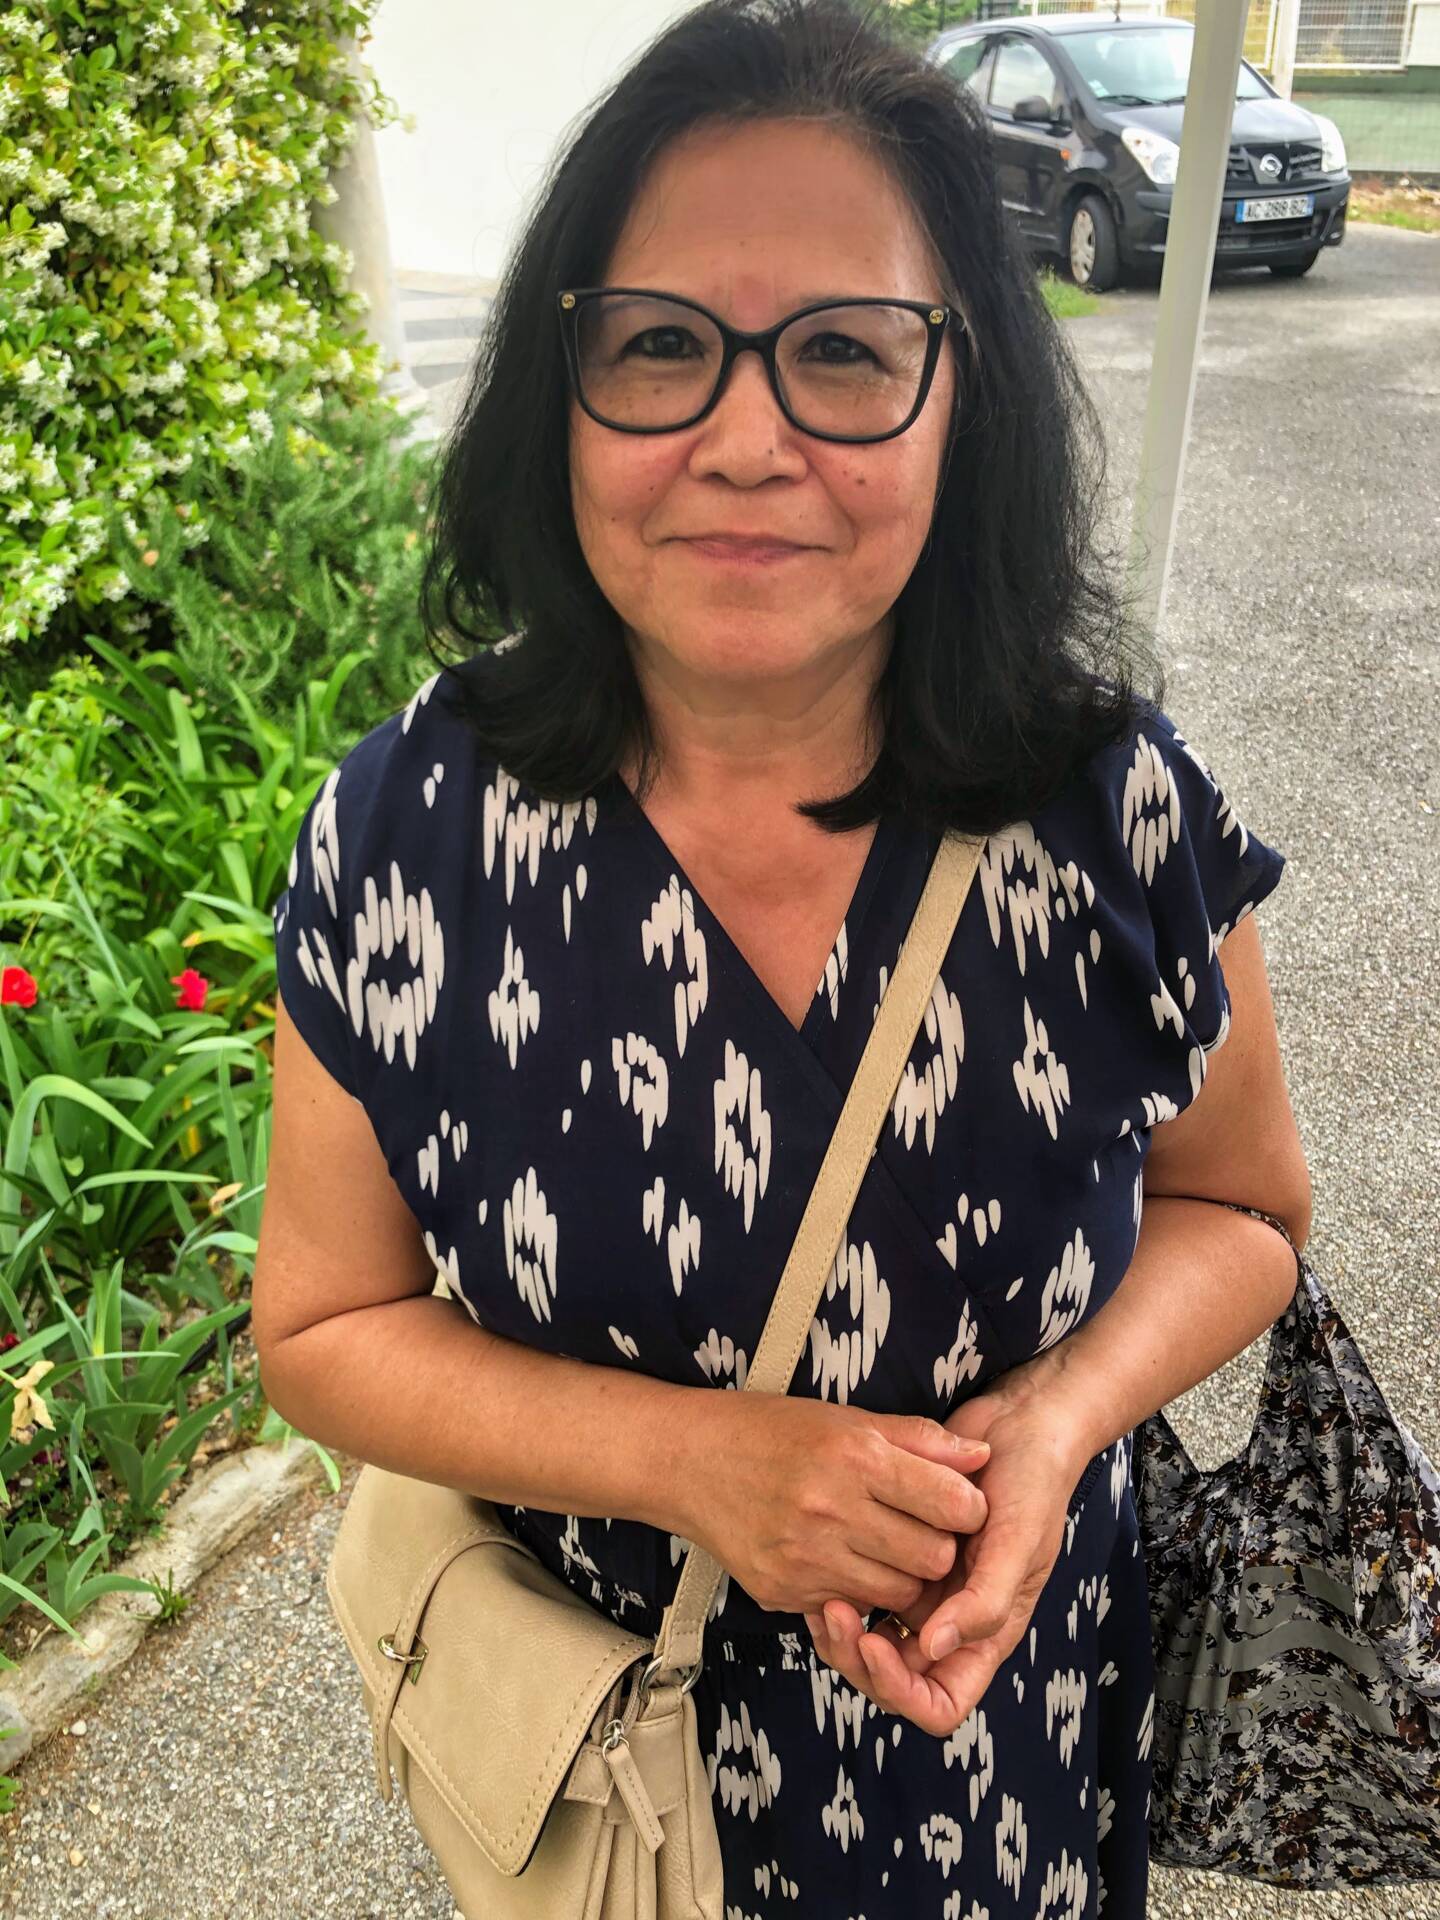 Gisèle Navarro, 67, took a course in French political life from the Revolution to the present, during the 2021-2022 school year, at the University of the Côte d’Azur.  Gisèle Navarro, 67, took a course in French political life from the Revolution to the present, in the school year 2021-2022, at the University of Côte d’Azur.  Gisèle Navarro, 67, took a course on French political life from the Revolution to the present, in the 2021-2022 school year, at the University of Côte d’Azur.